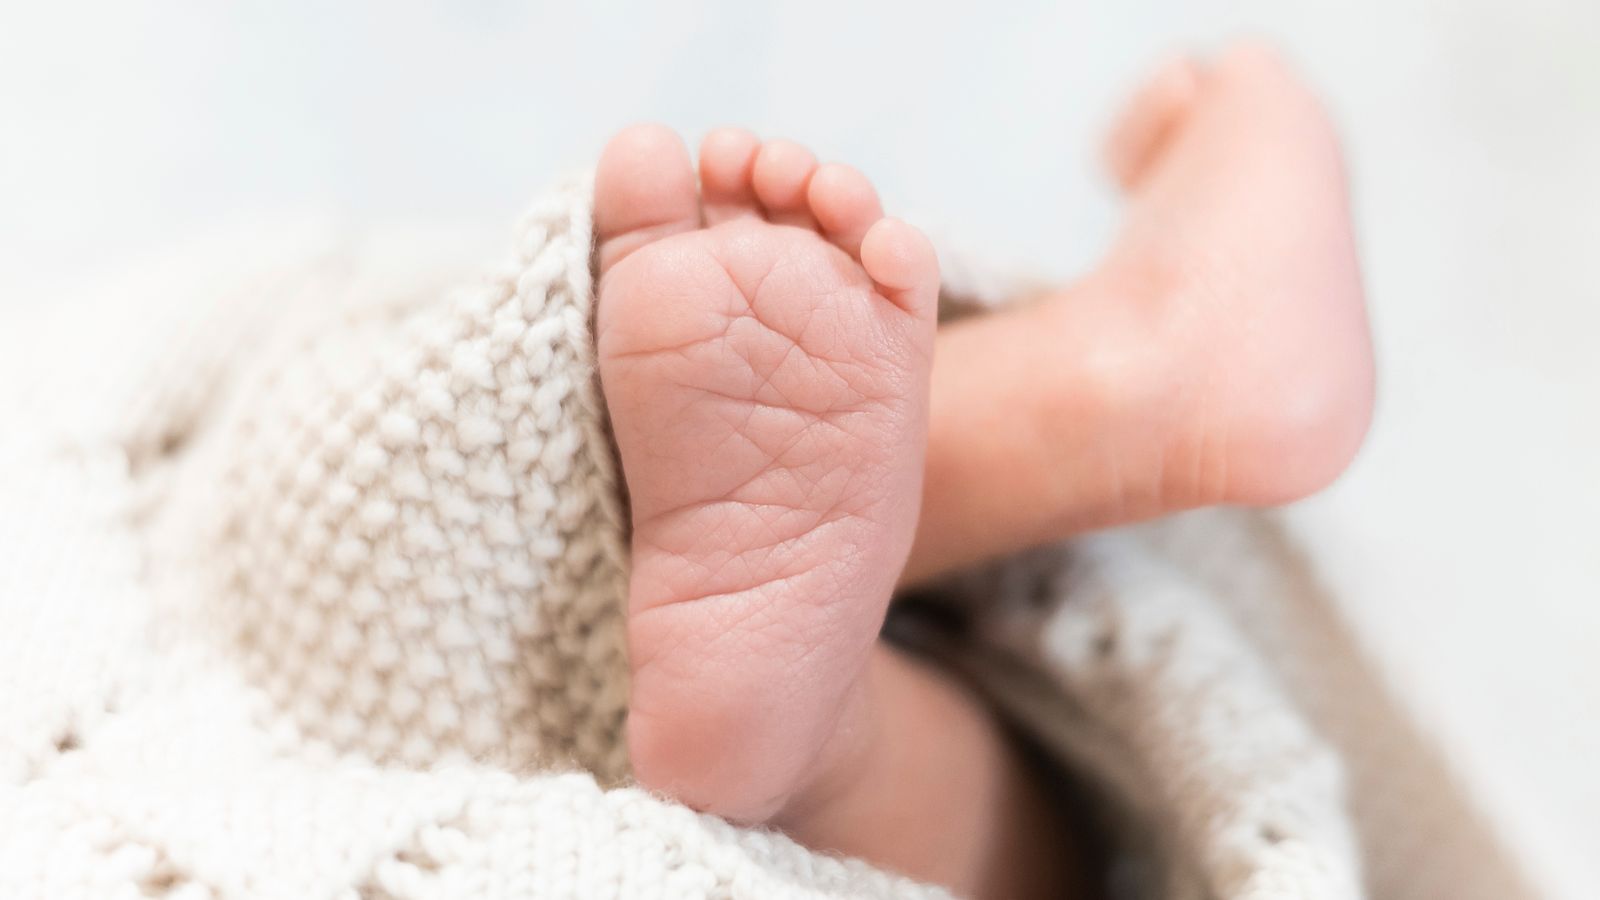 majority-of-babies-born-in-england-and-wales-in-2021-were-out-of-wedlock-new-statistics-reveal